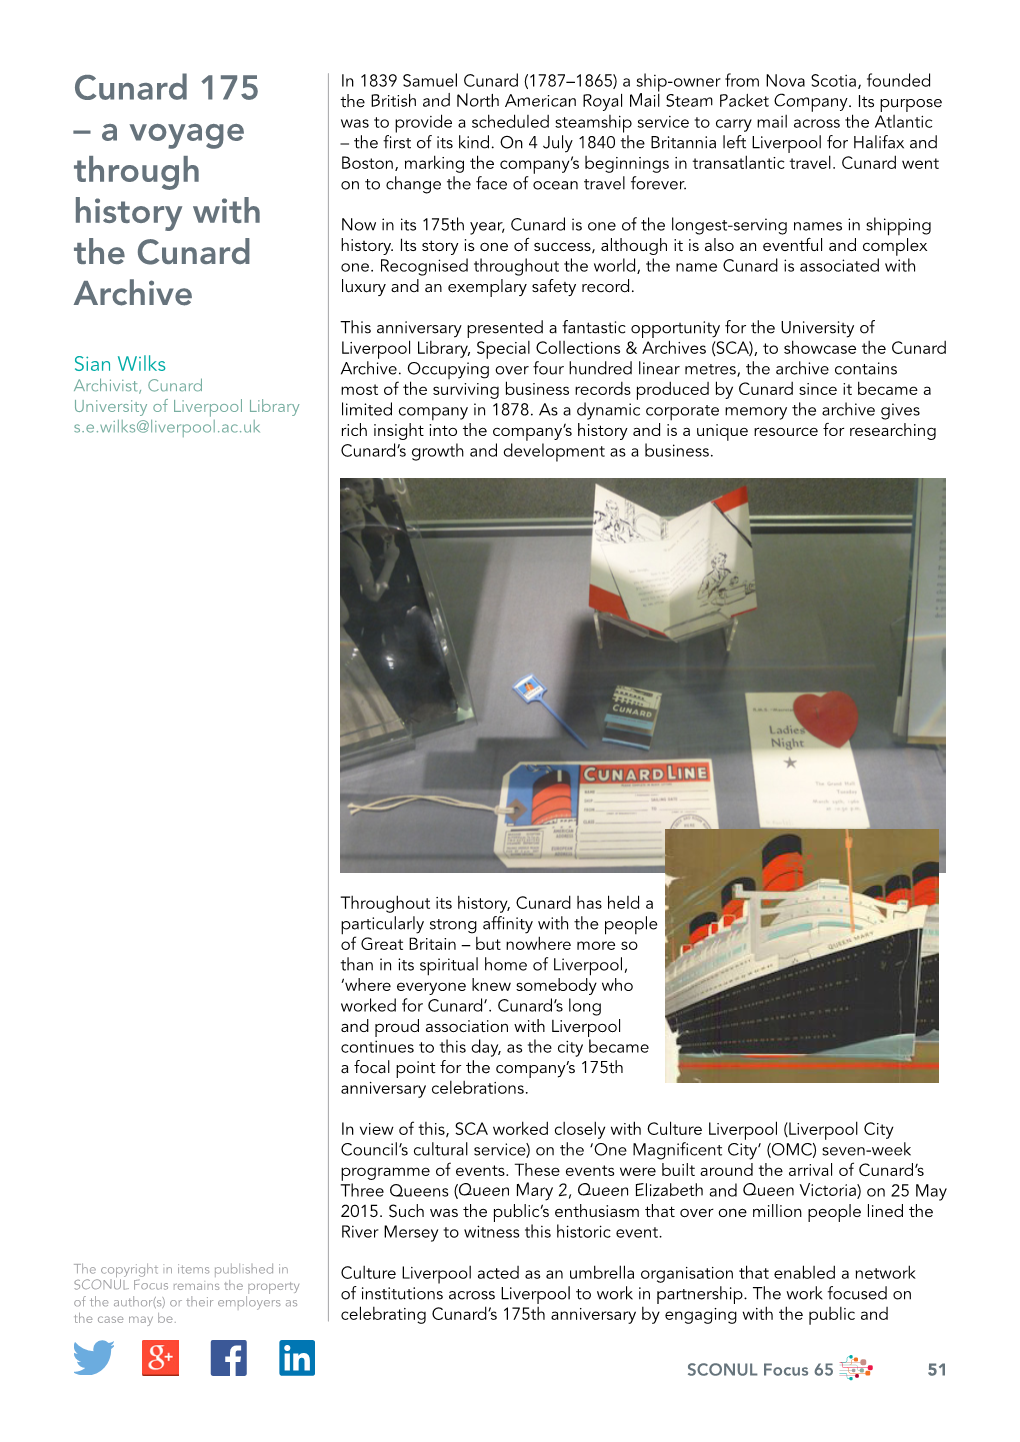 A Voyage Through History with the Cunard Archive